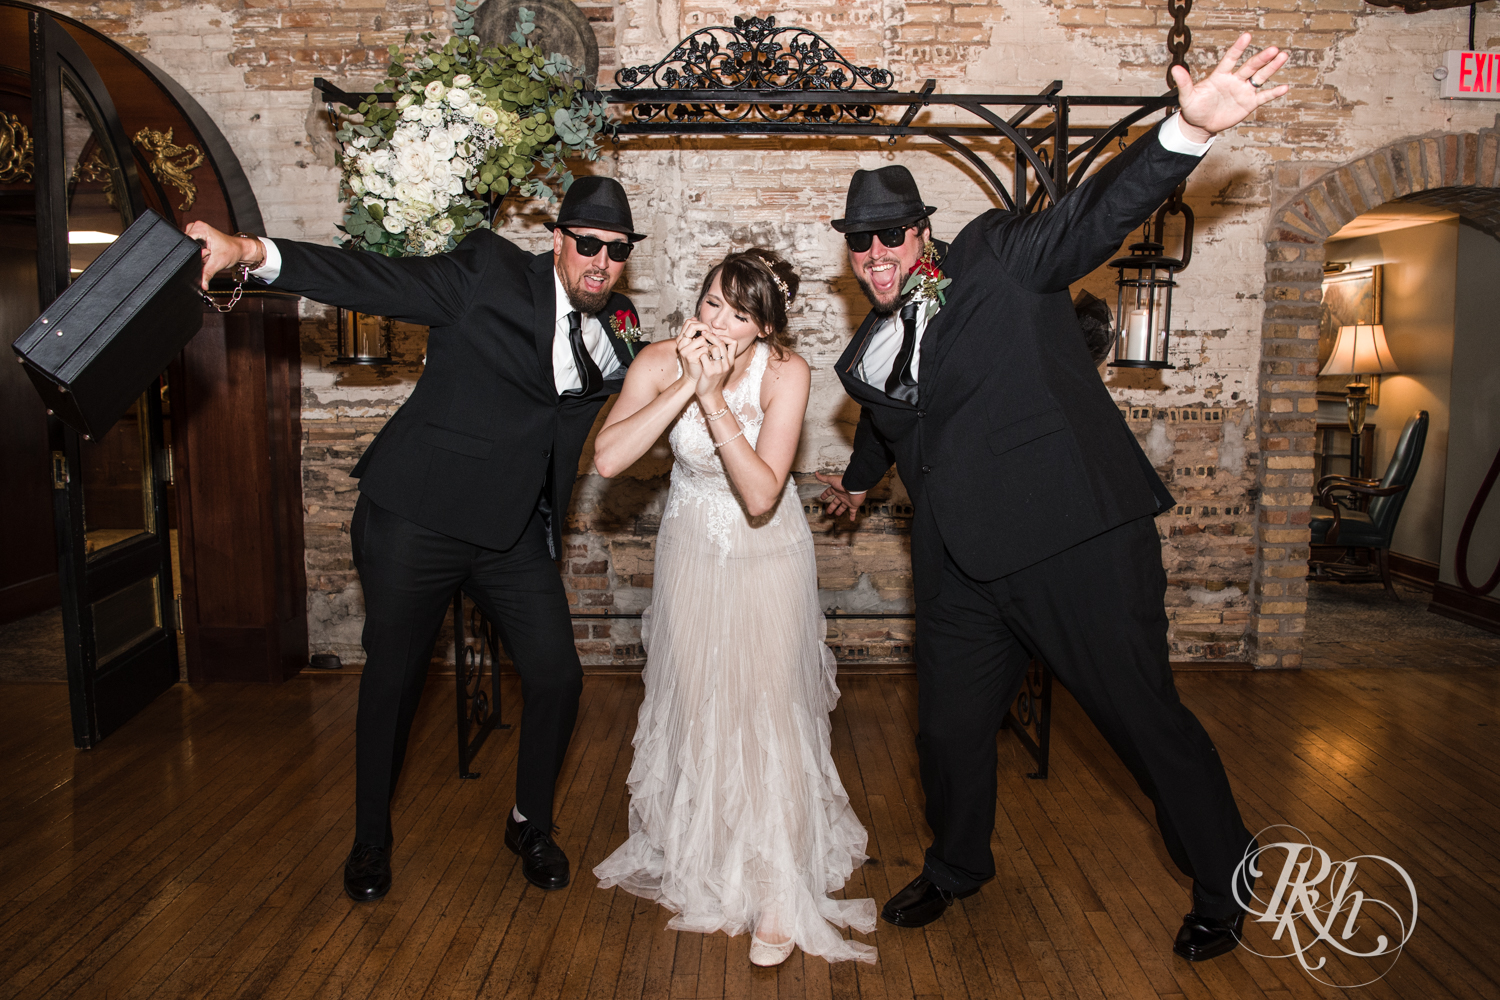 Bride plays harmonica with brothers dressed as The Blues Brothers at Kellerman's Event Center in White Bear Lake, Minnesota.